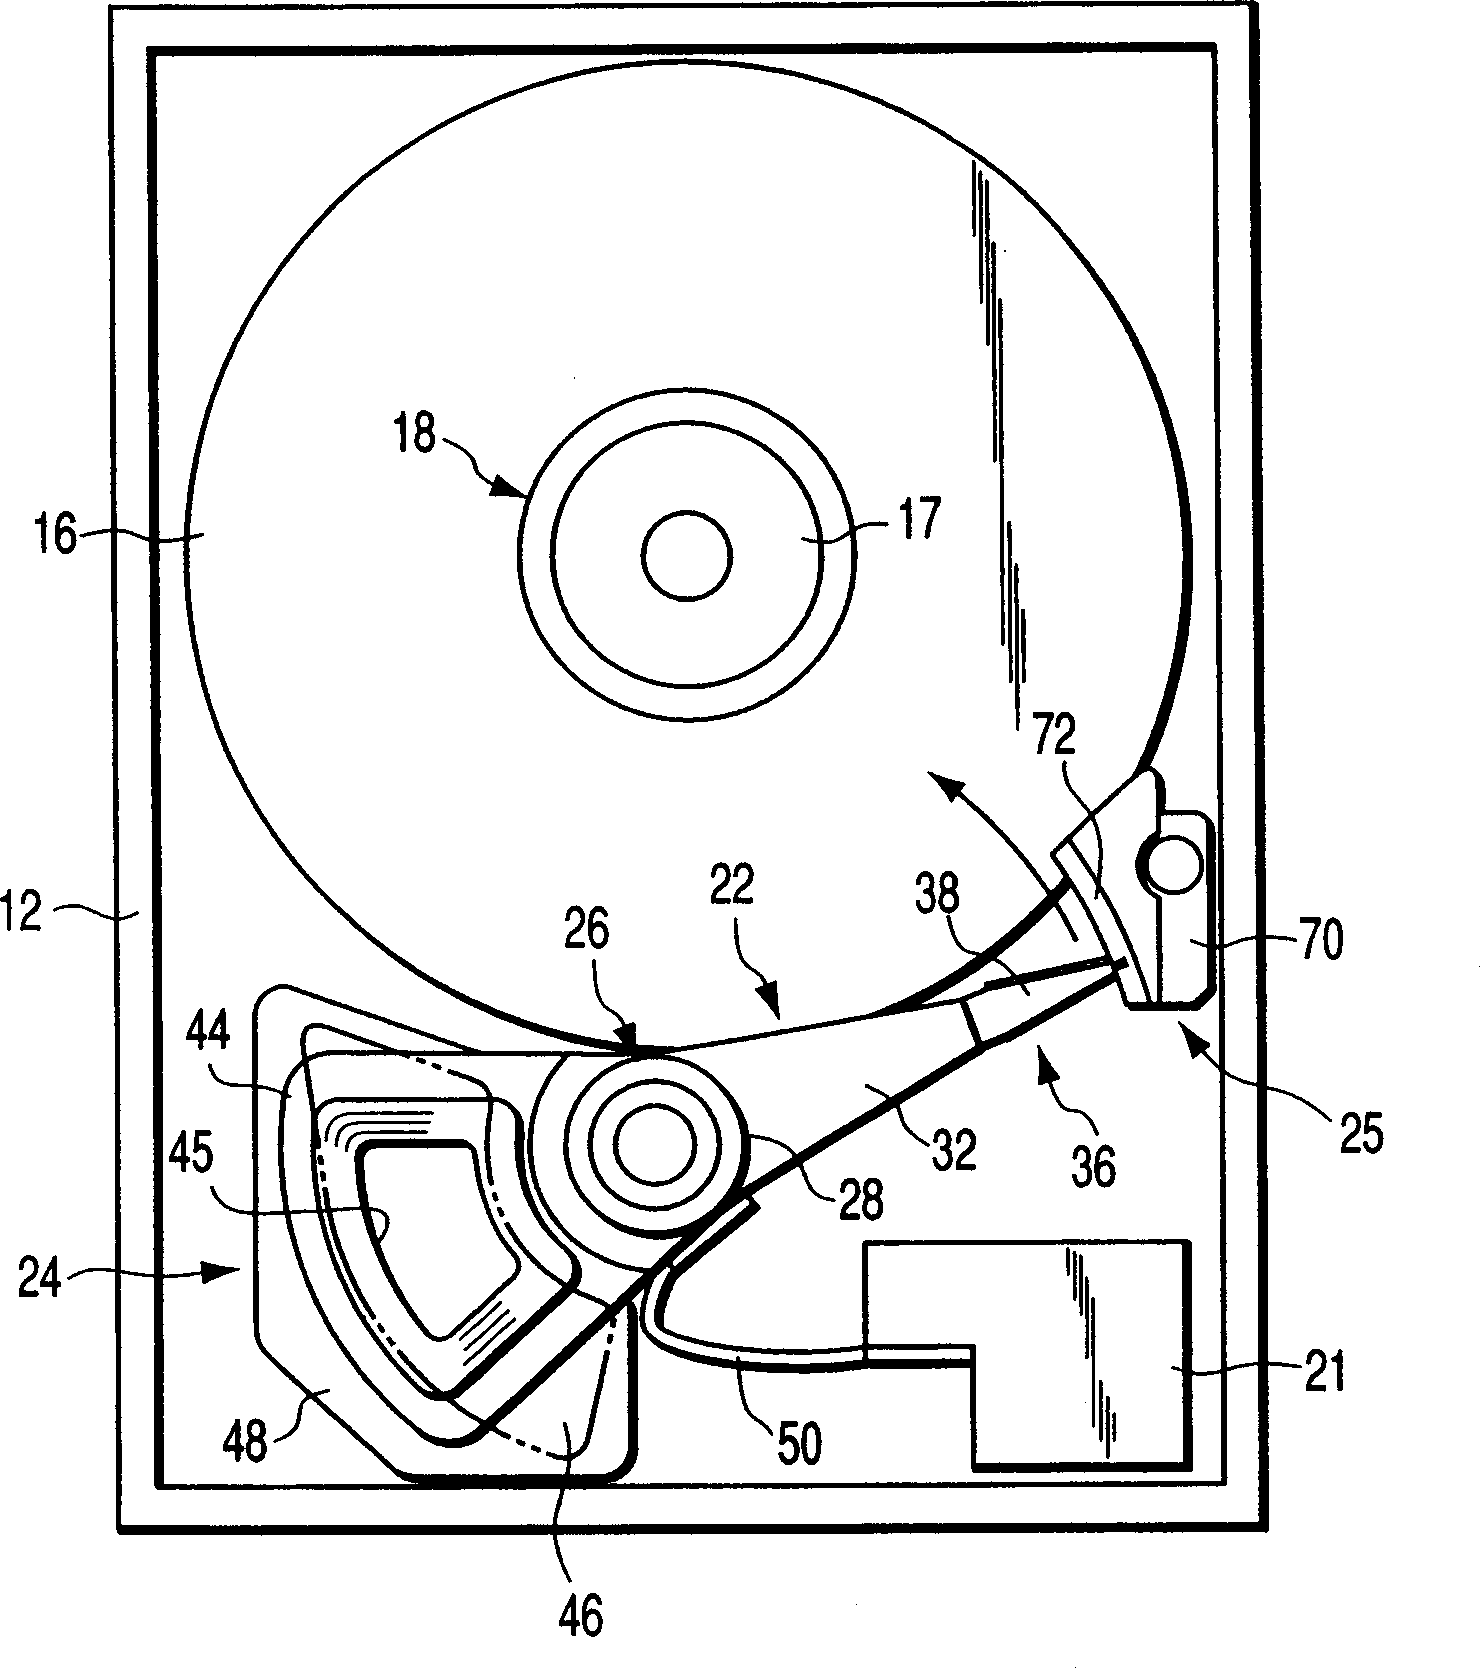 Disk driving device